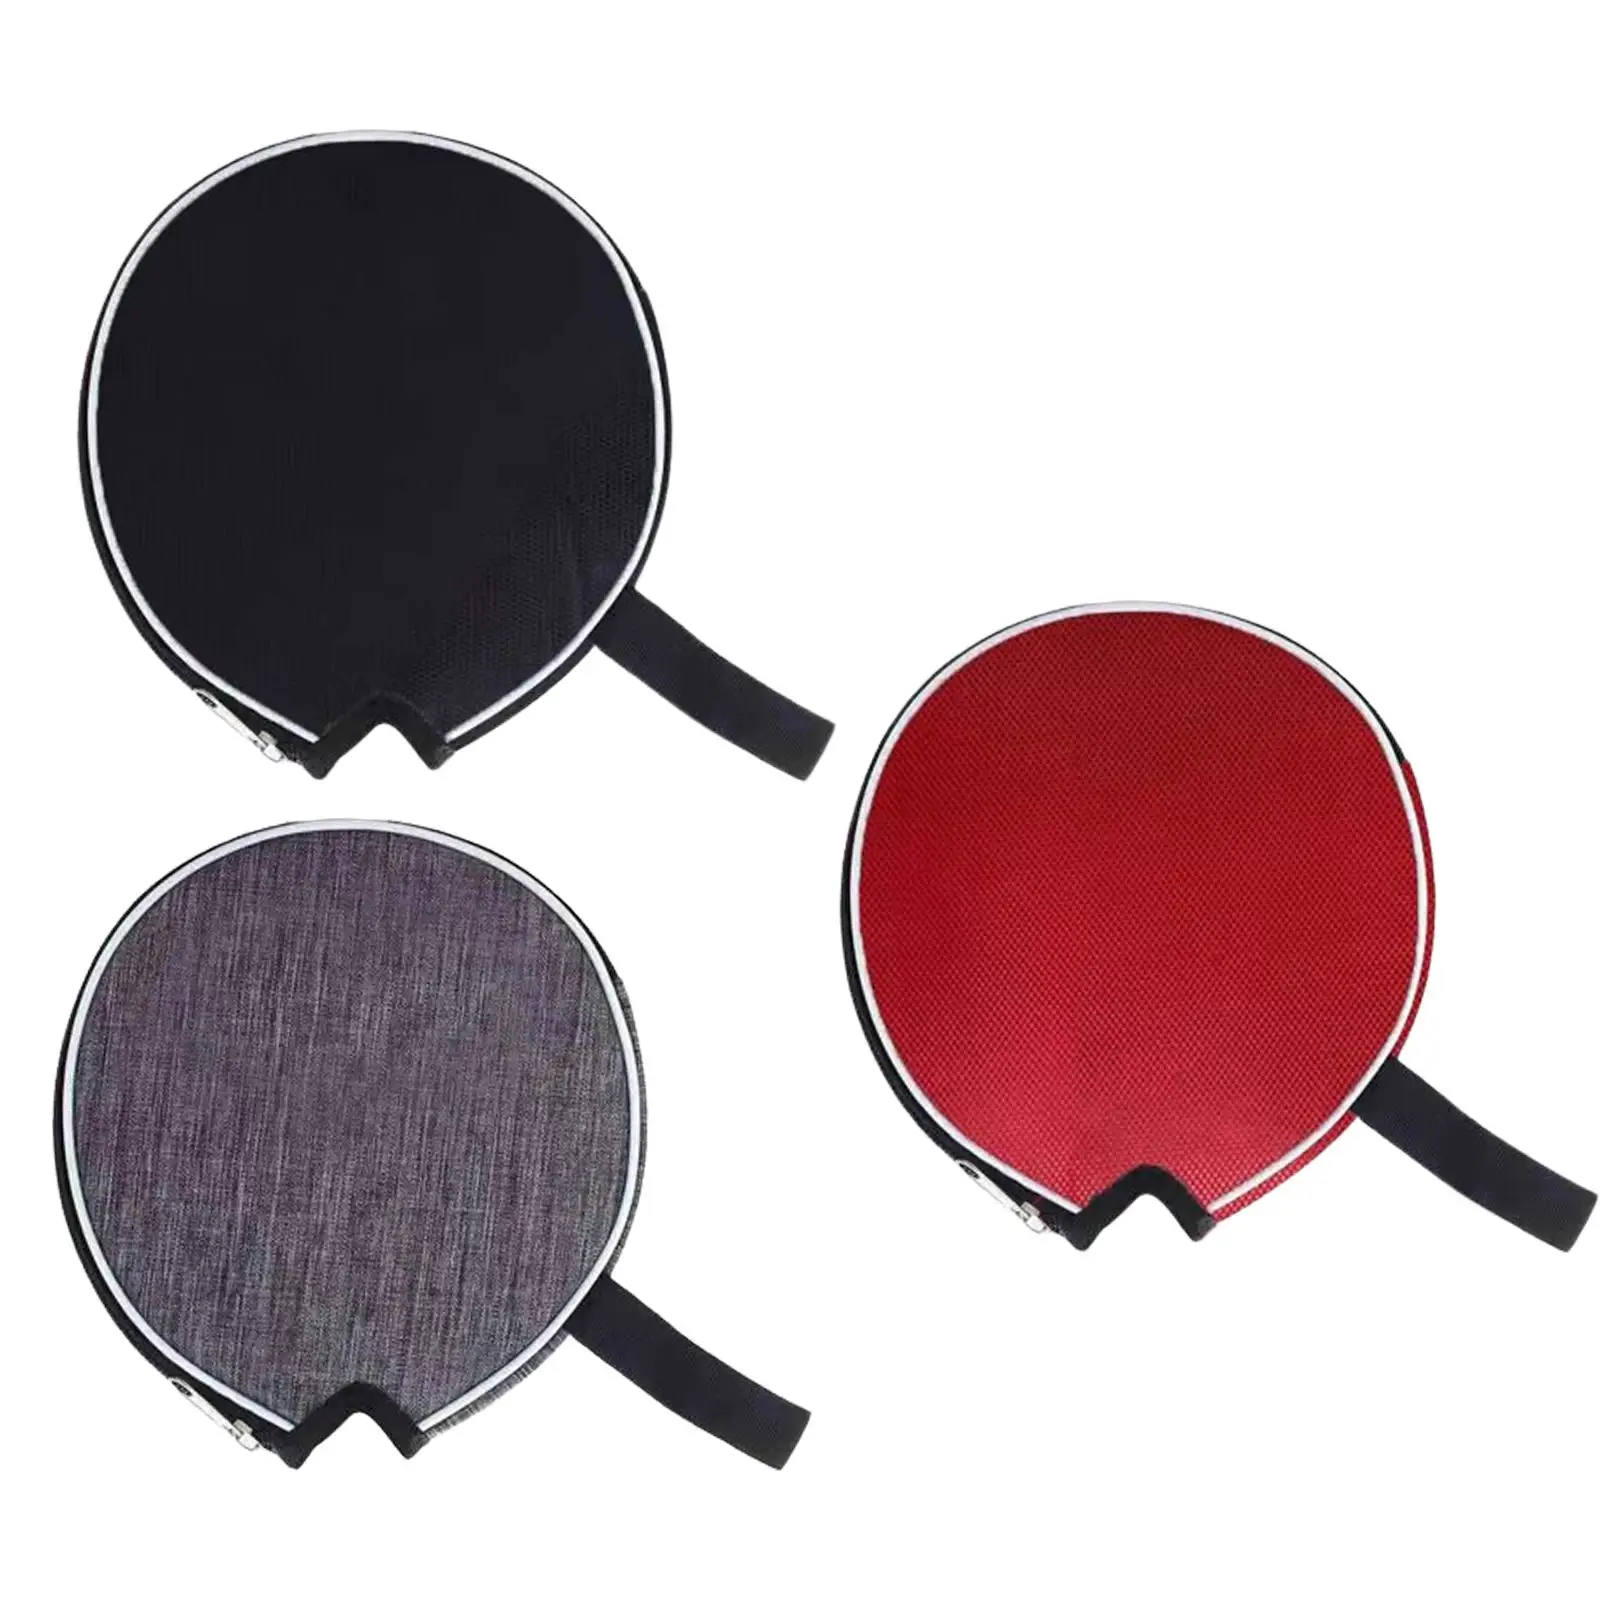 Table Tennis Racket Cover Large Capacity with Zipper Sturdy Waterproof Pouch for Travel Training Outdoors Competition